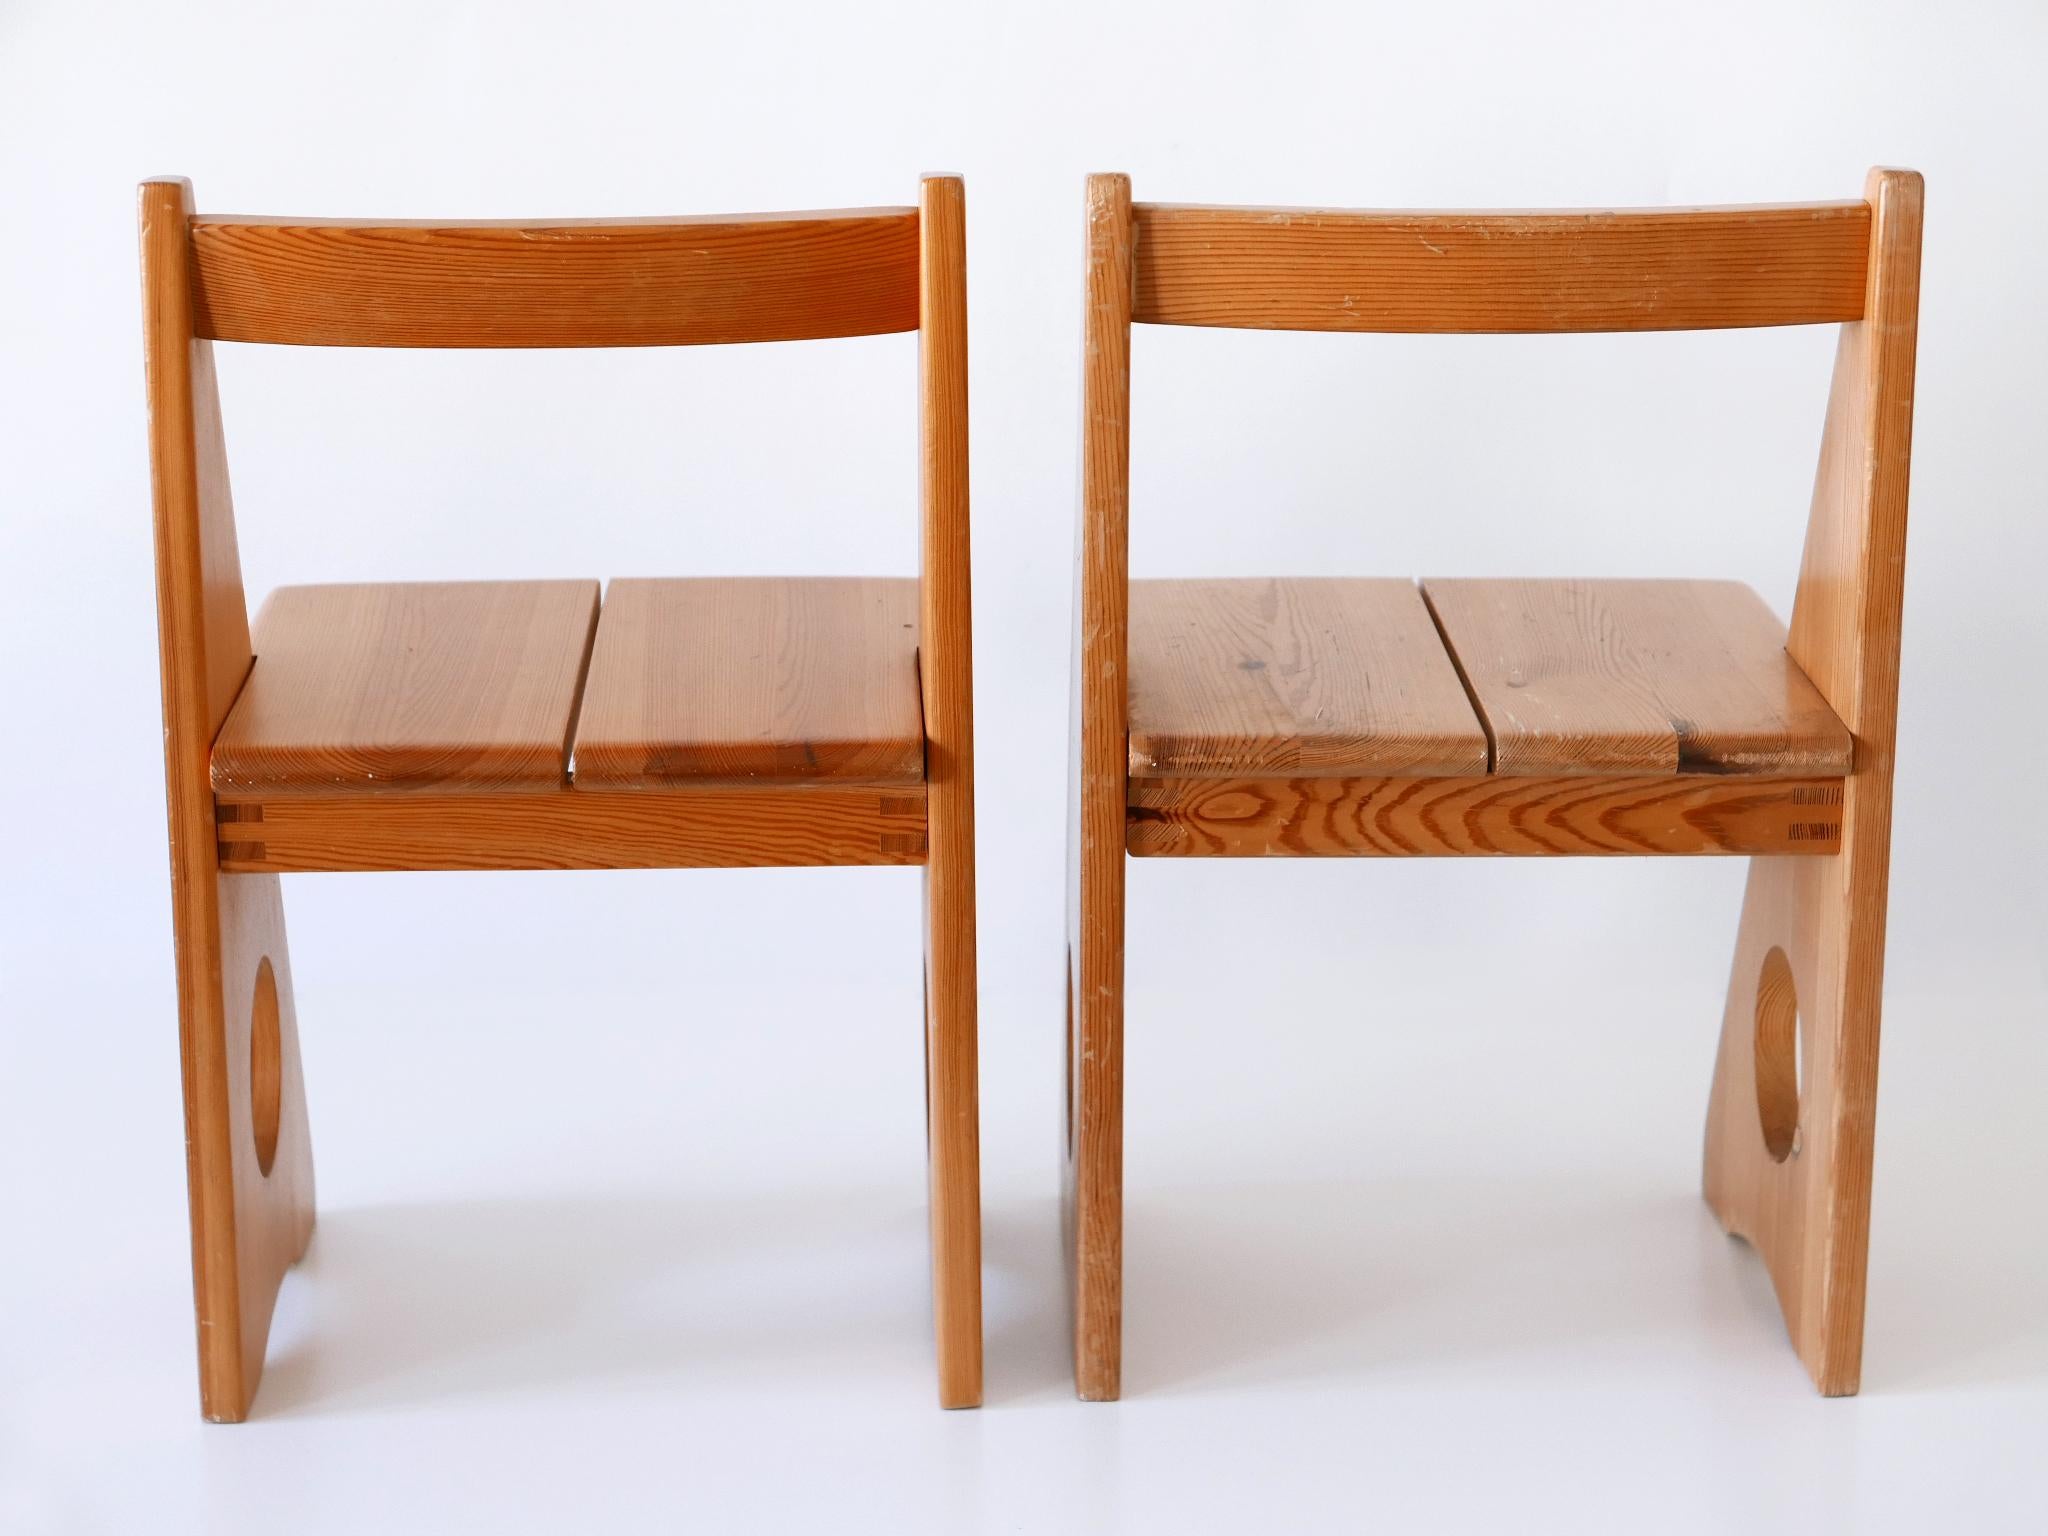 Pine Set of Two Children's Chairs by Gilbert Marklund for Furusnickarn Sweden, 1970s For Sale